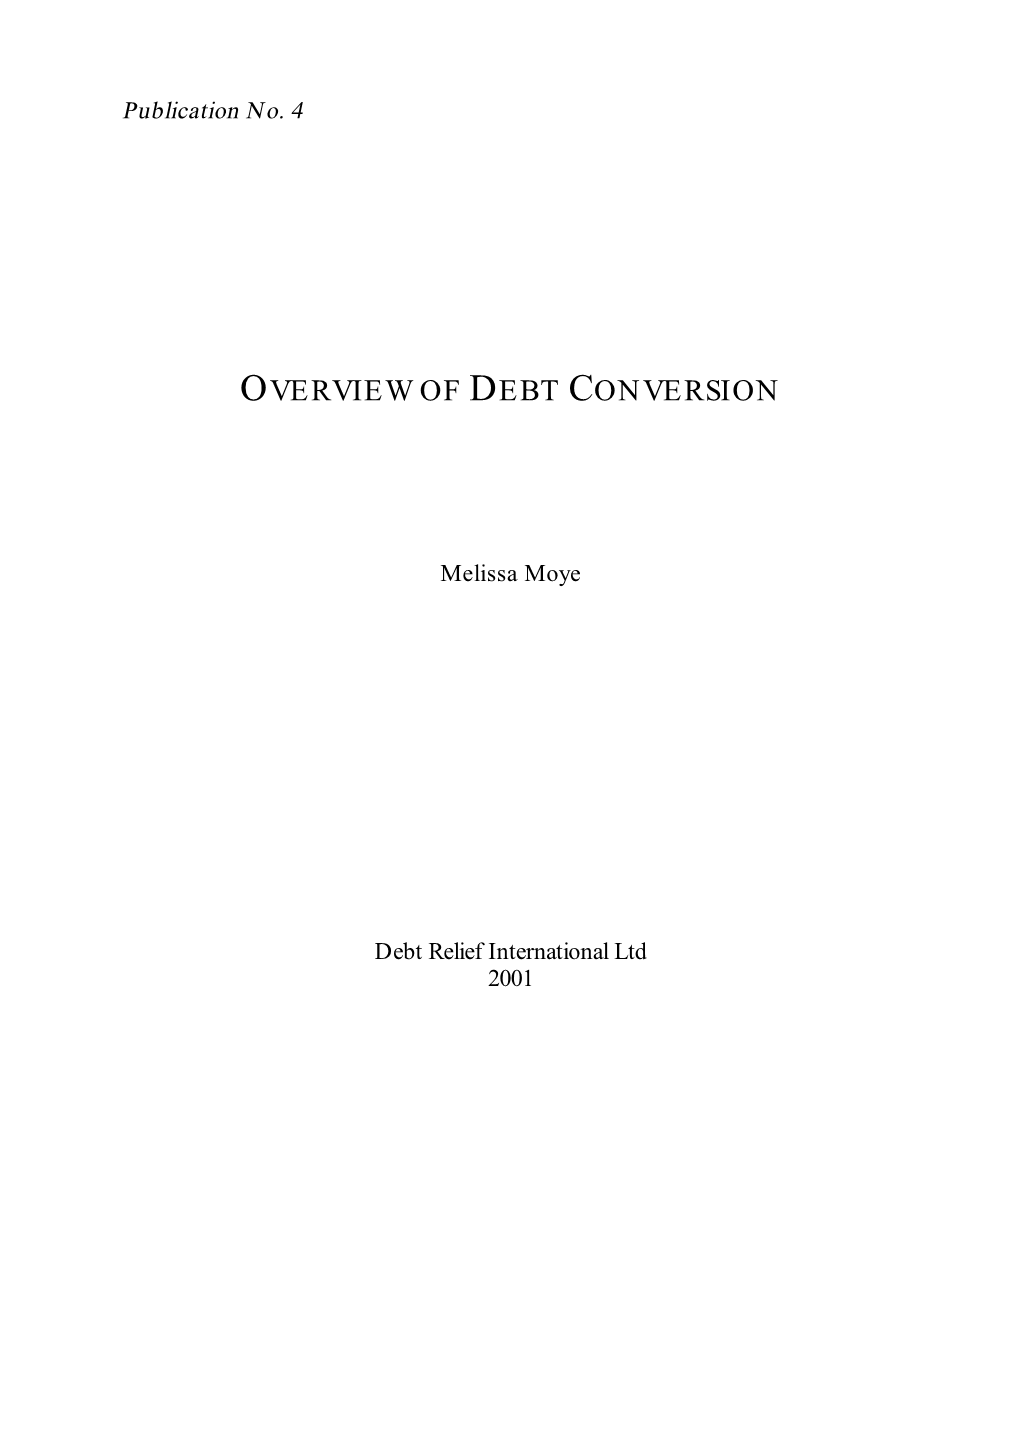 Overview of Debt Conversion